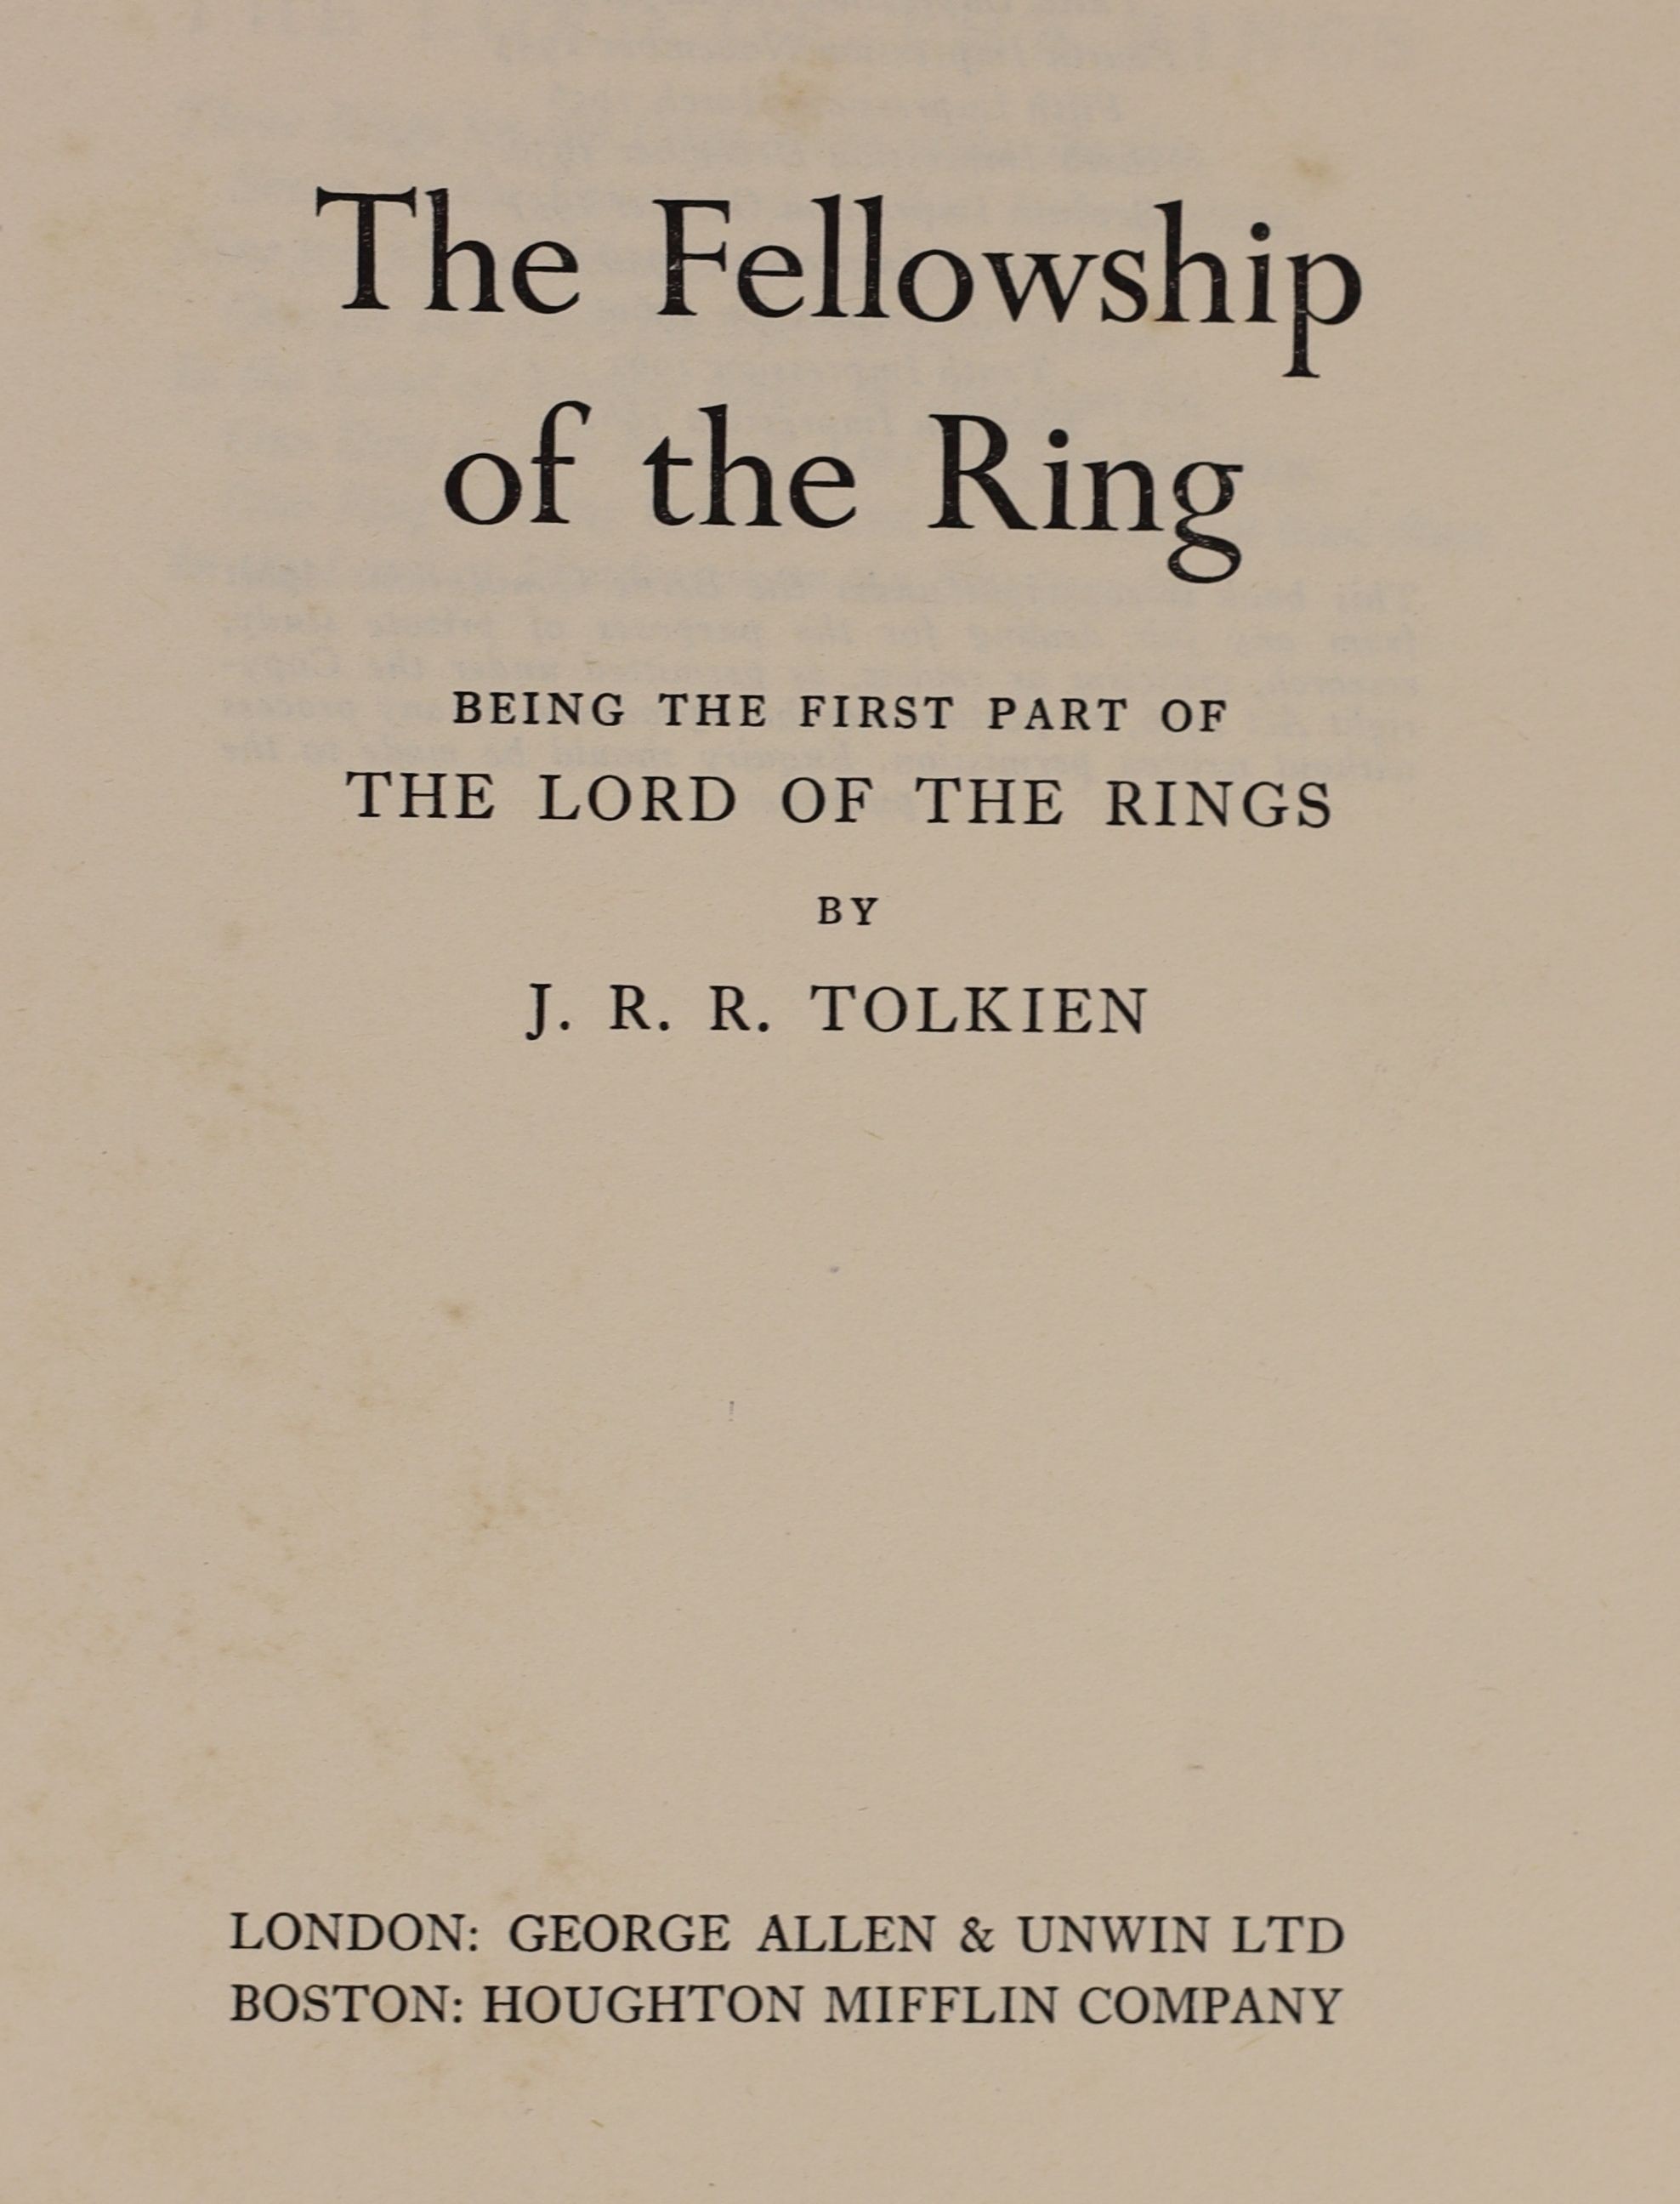 Tolkien, J.R.R - Lord of the Rings - The Fellowship of the Ring, 11th impression, 1961, The Two Towers, 10th impression, 1963 and The Return of the King, 11th impression, 1965, all with unclipped d/j’s, retaining folded